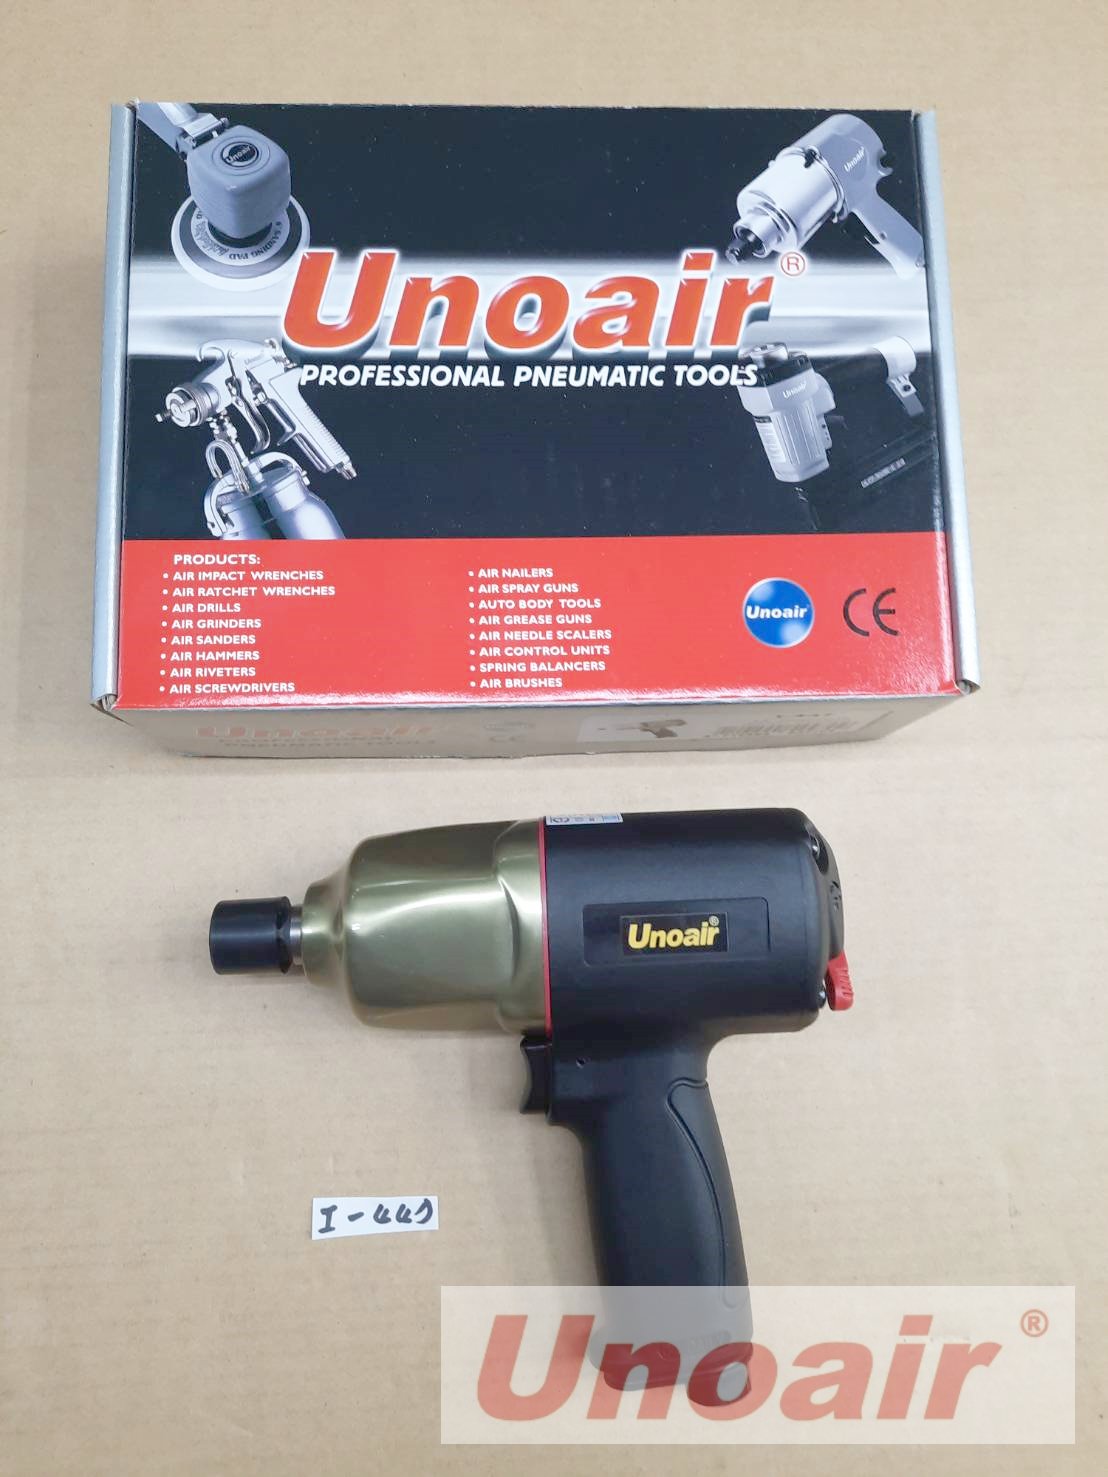 UNOAIR Weekly Update 10/28/2022 UNOAIR handtools and air tools for production line assembly, automotive repair/maintenance, home repair, construction site, and more.